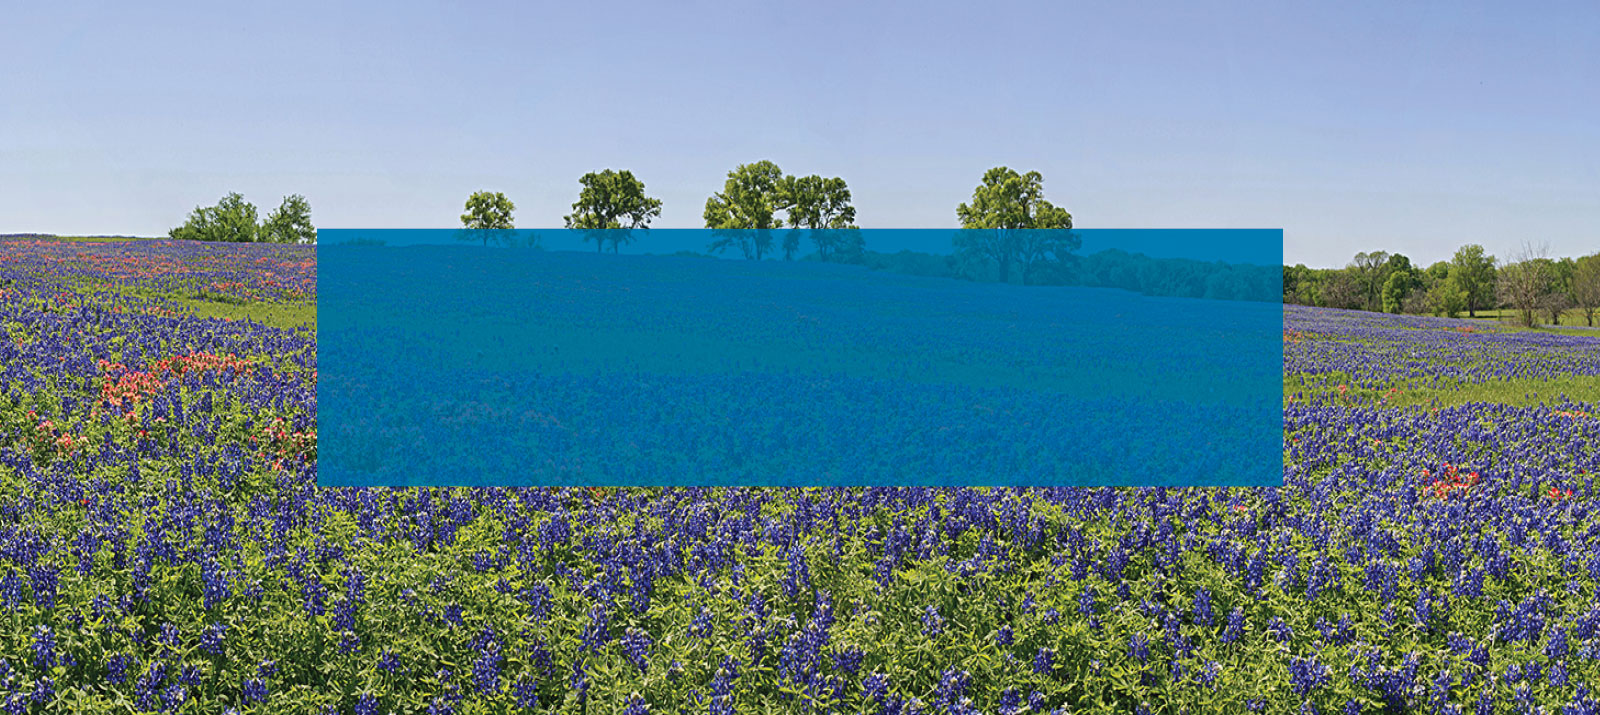 image of blue bonnets in field with blue text box